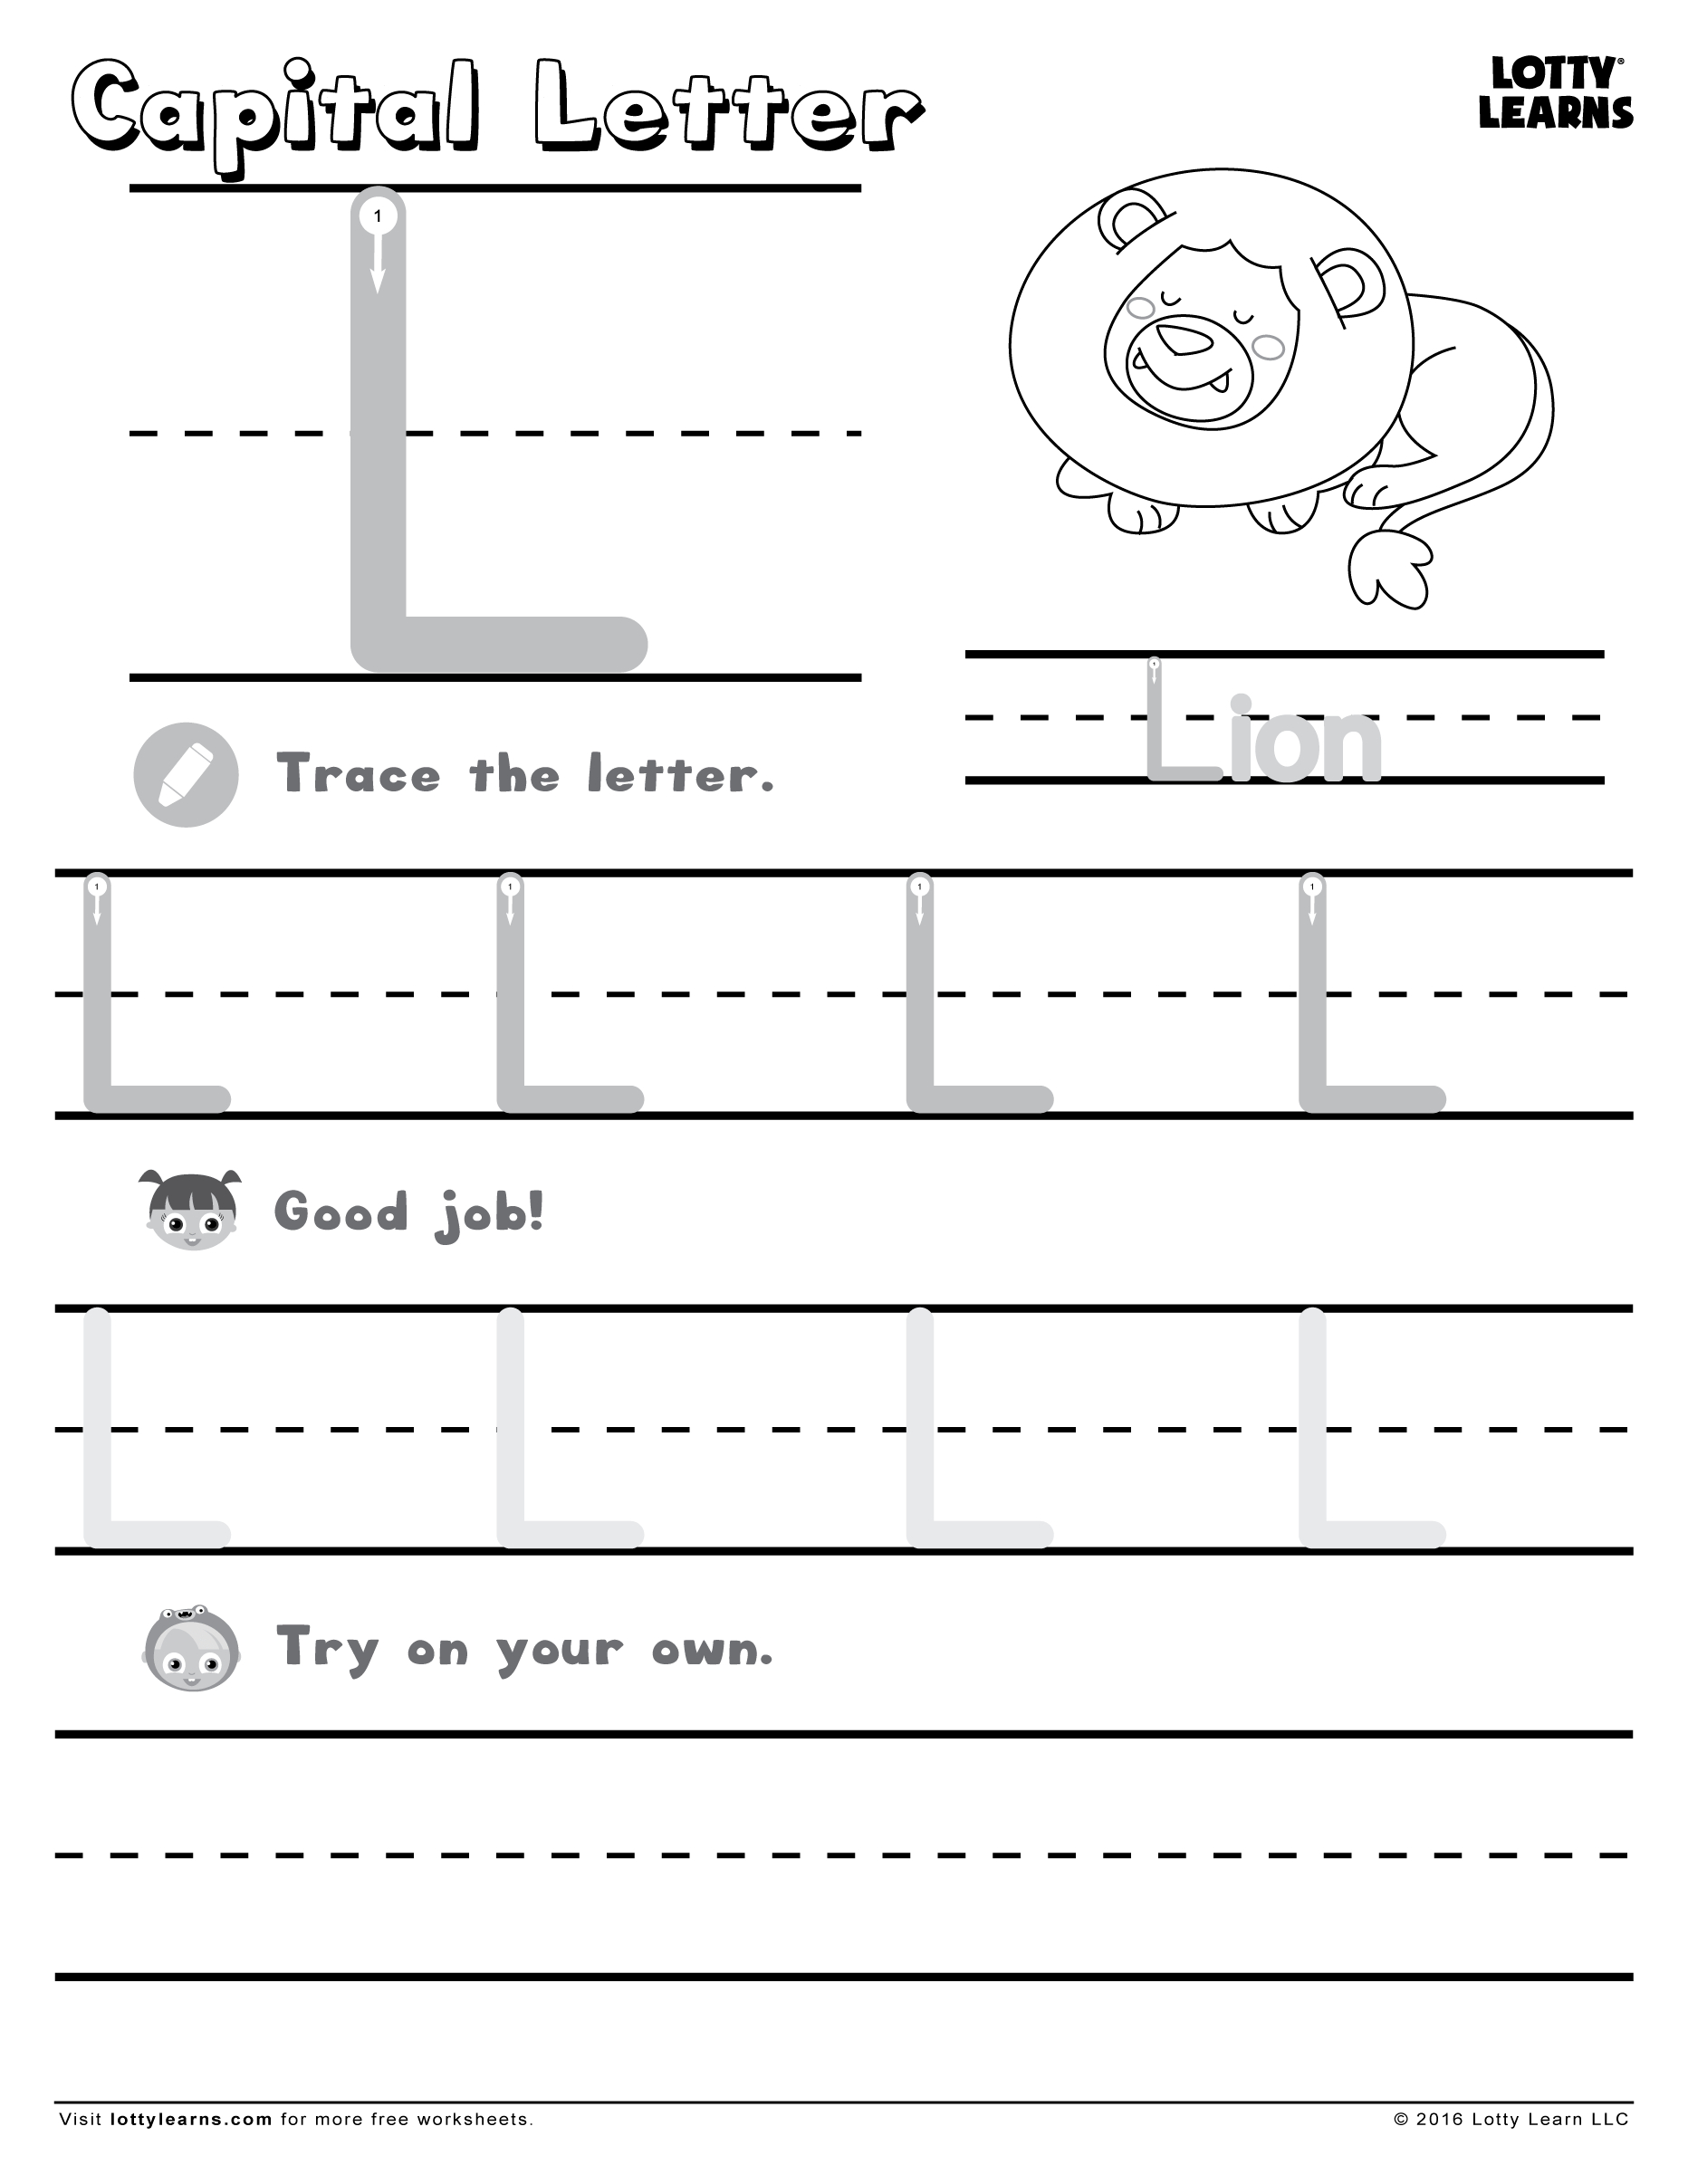 Capital Letter L | Lotty Learns | Lowercase A, Lower Case throughout Tracing Letter L Worksheets